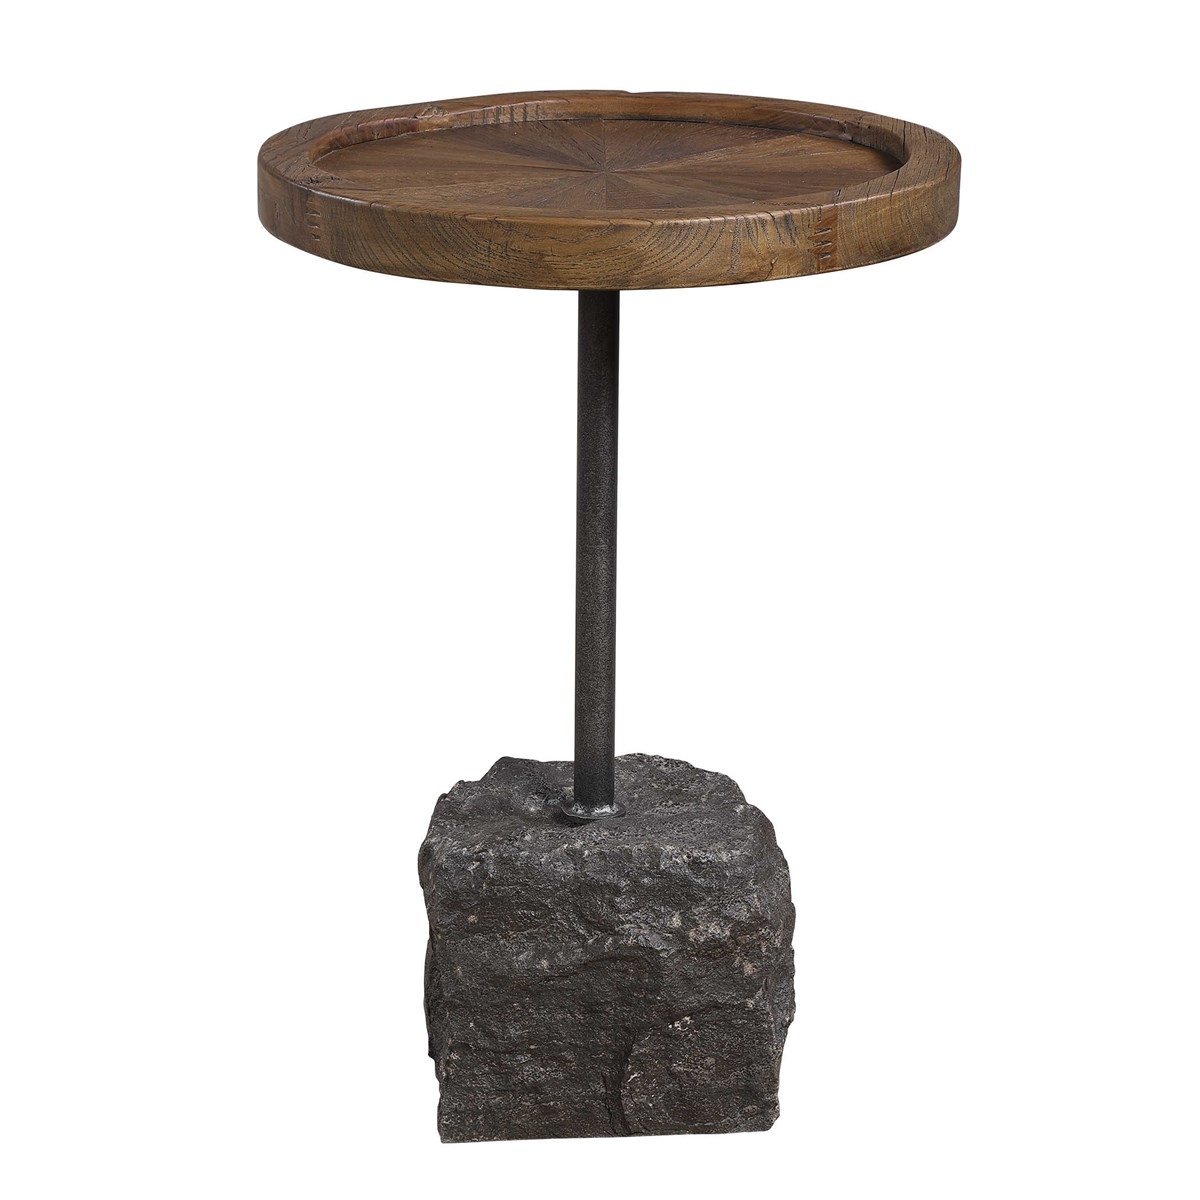 Horton Rustic Accent Table - Image 3